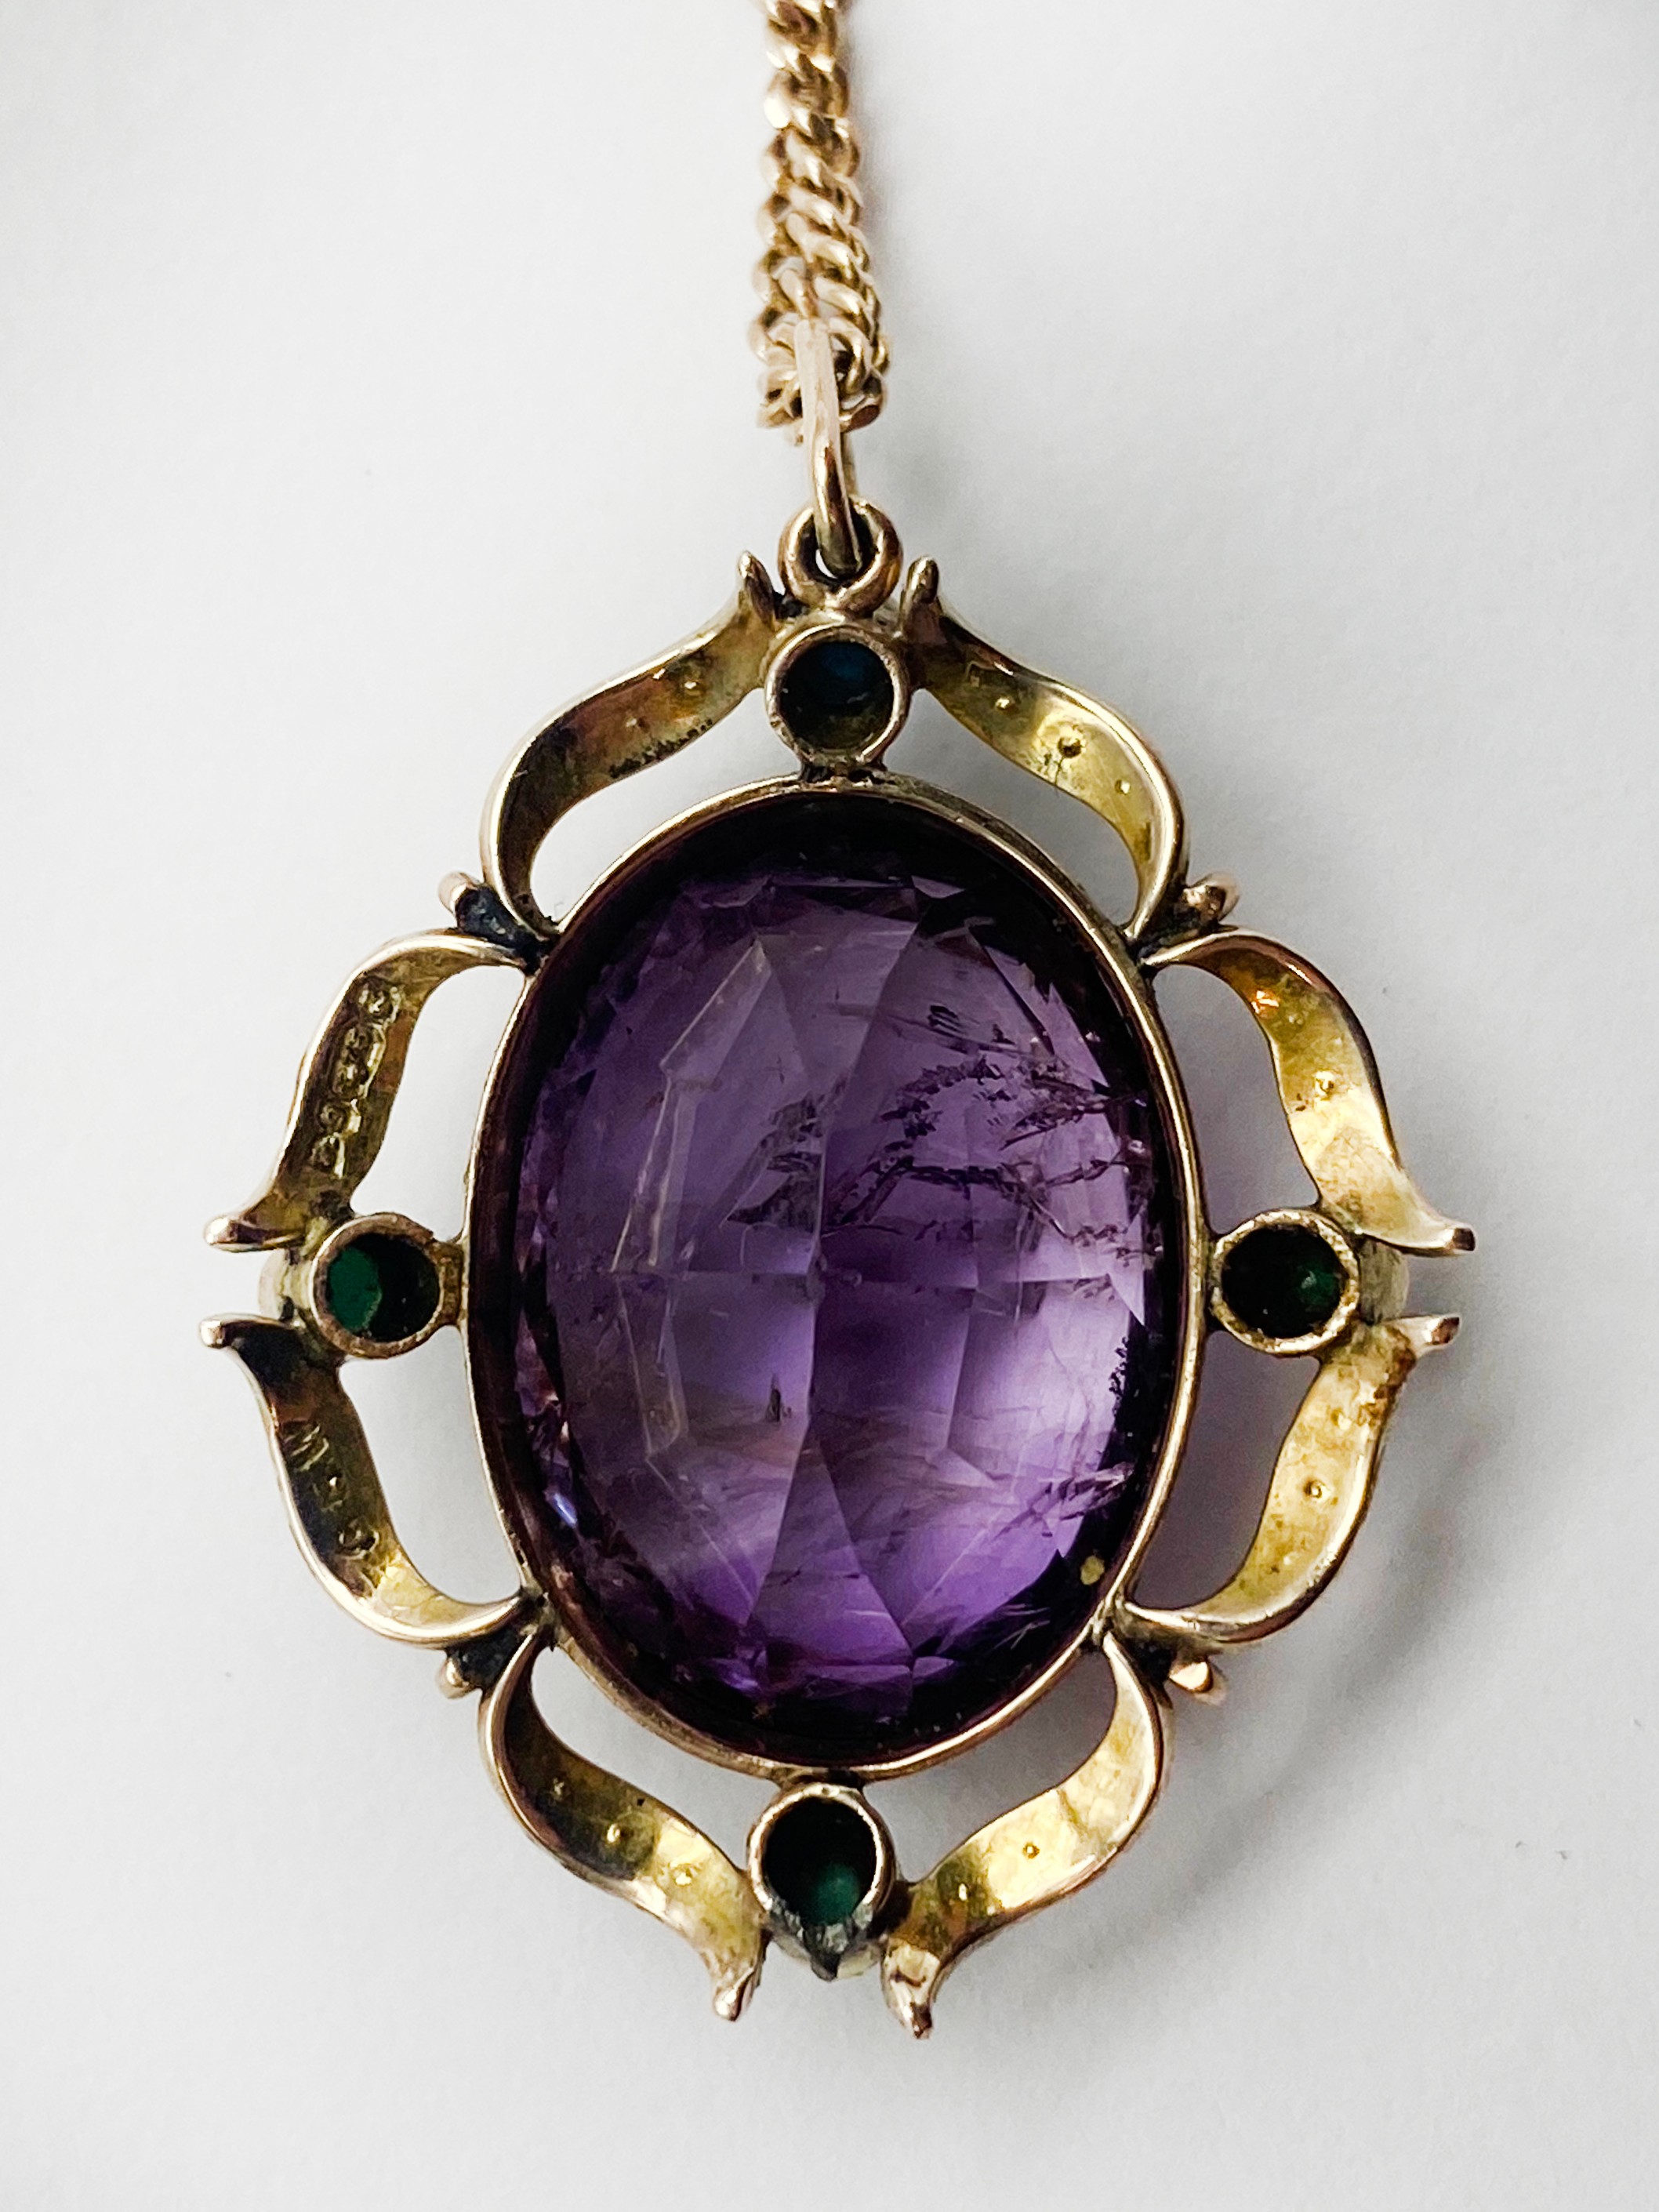 9CT GOLD AMETHYST, TURQUOISE & SEED PEAL PENDANT AND CHAIN - Image 4 of 4